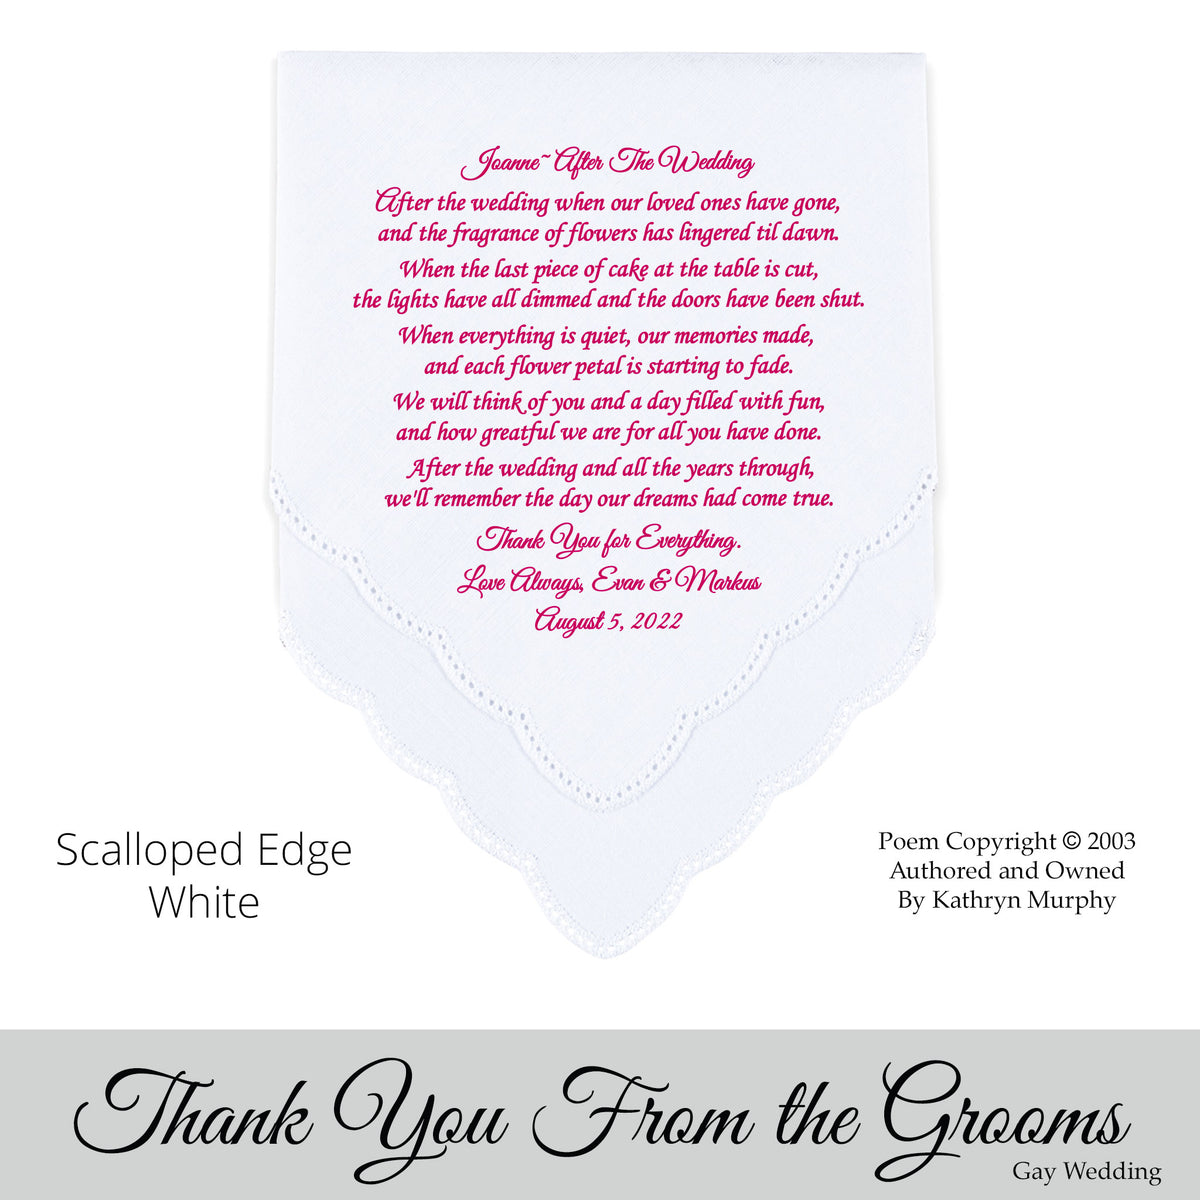 Gay Wedding Gift for a loved one or friend of the groom poem printed wedding hankie